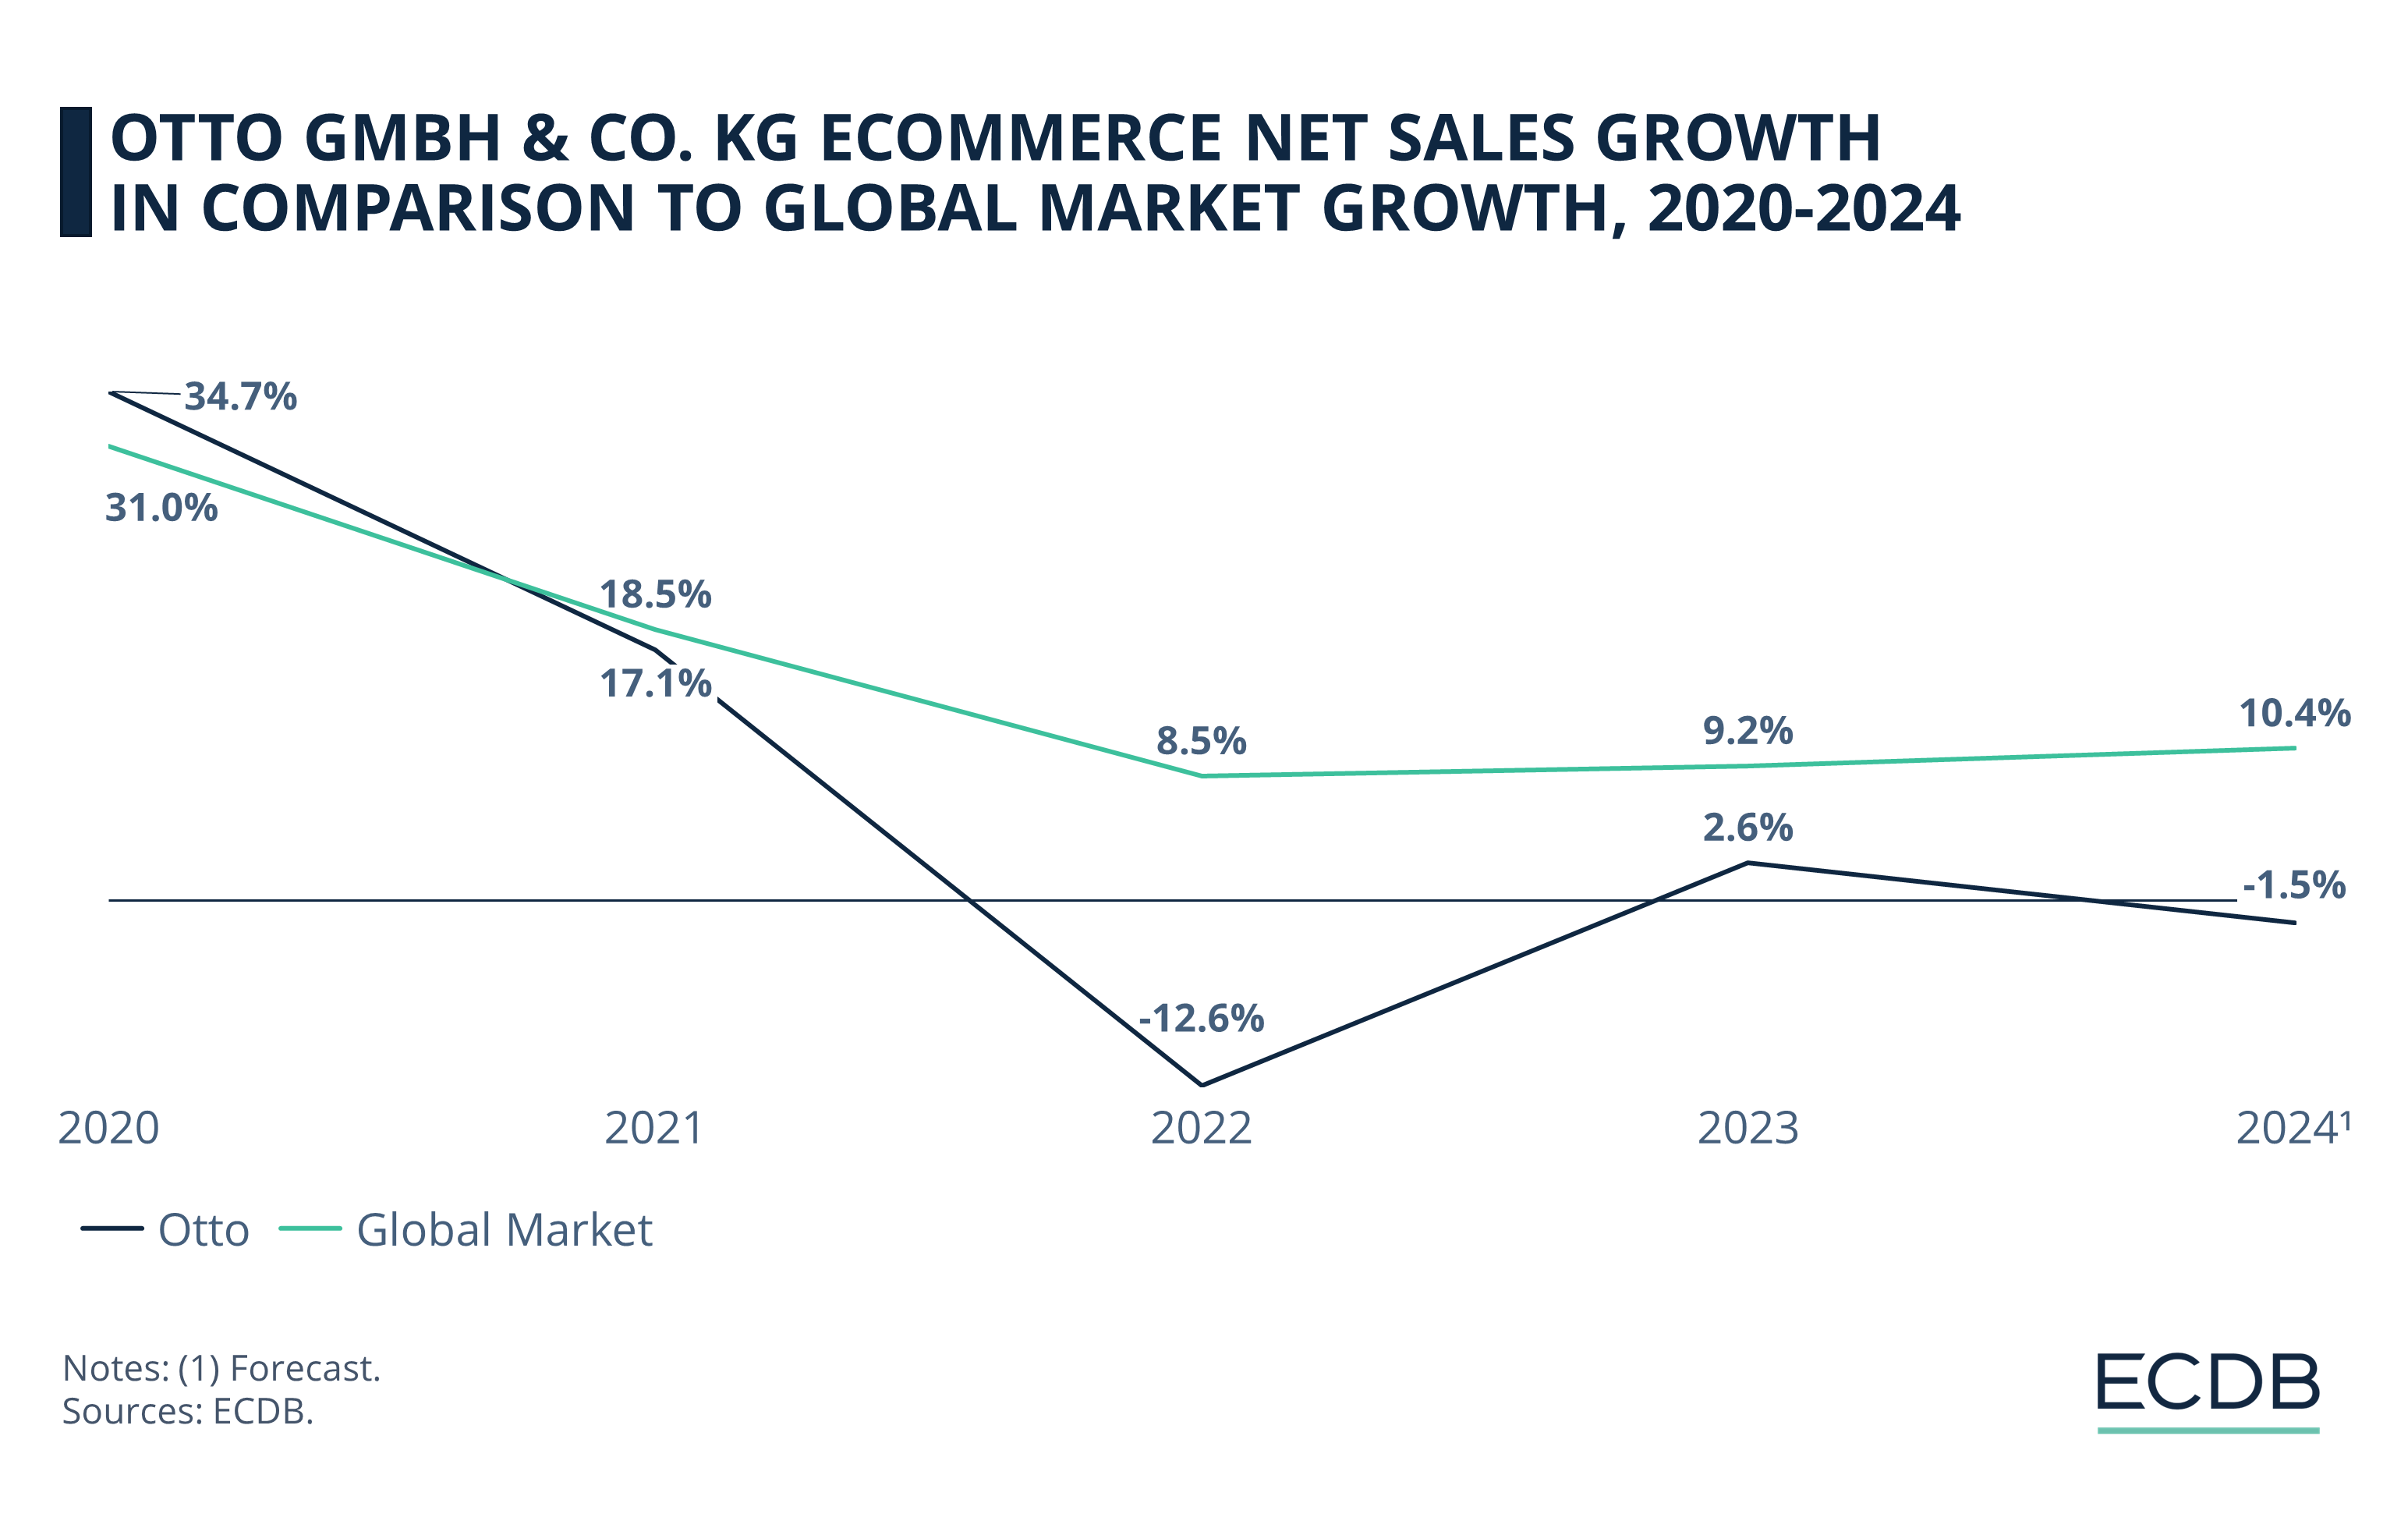 Otto GmbH & Co. KG eCommerce Net Sales Growth in Comparison to Global Market Growth, 2020-2024